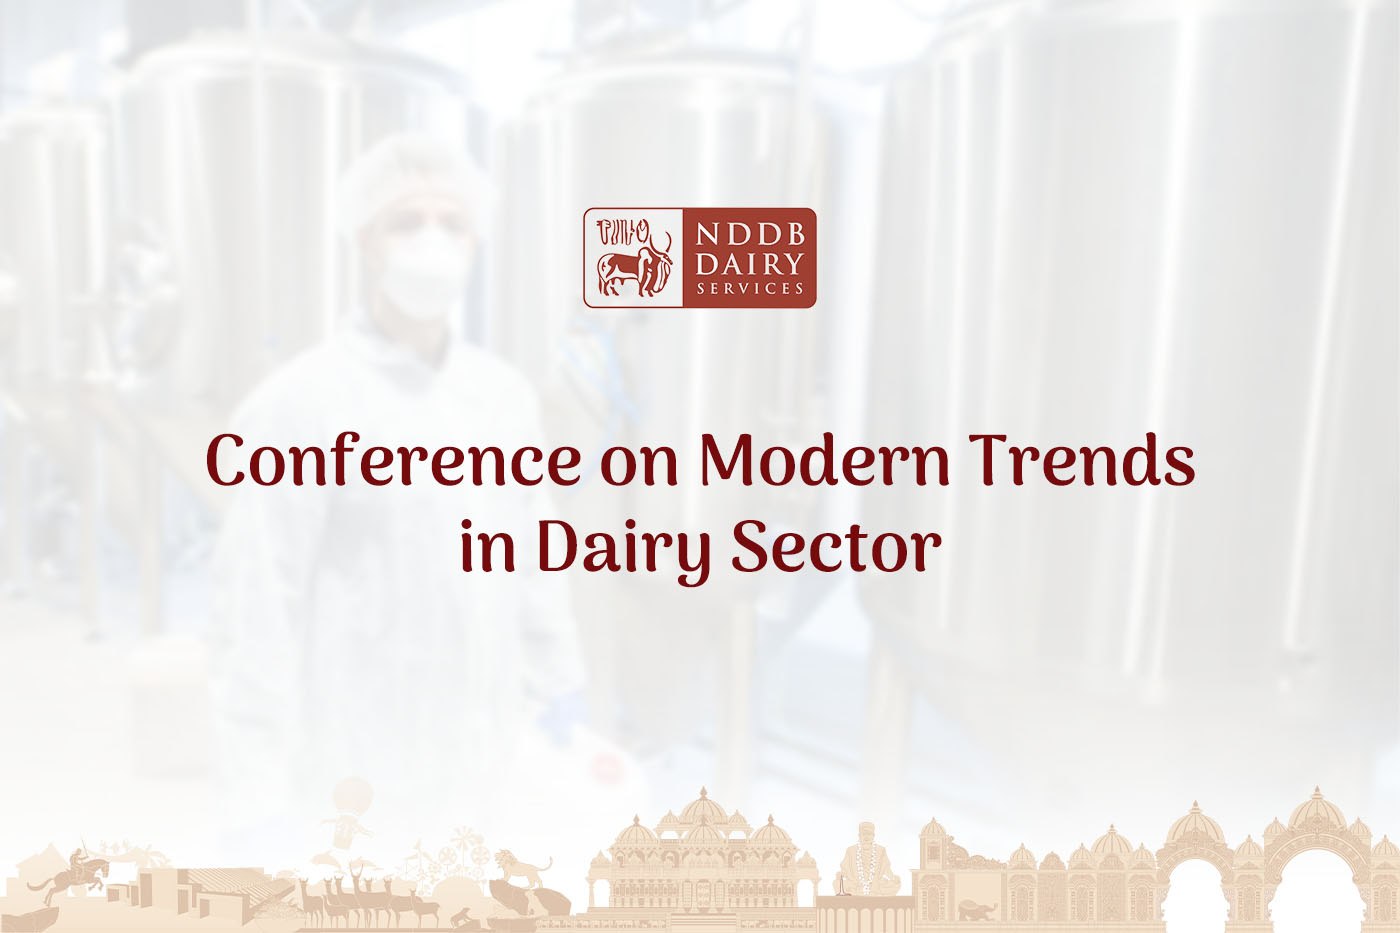 Conference on Modern Trends in Dairy Sector